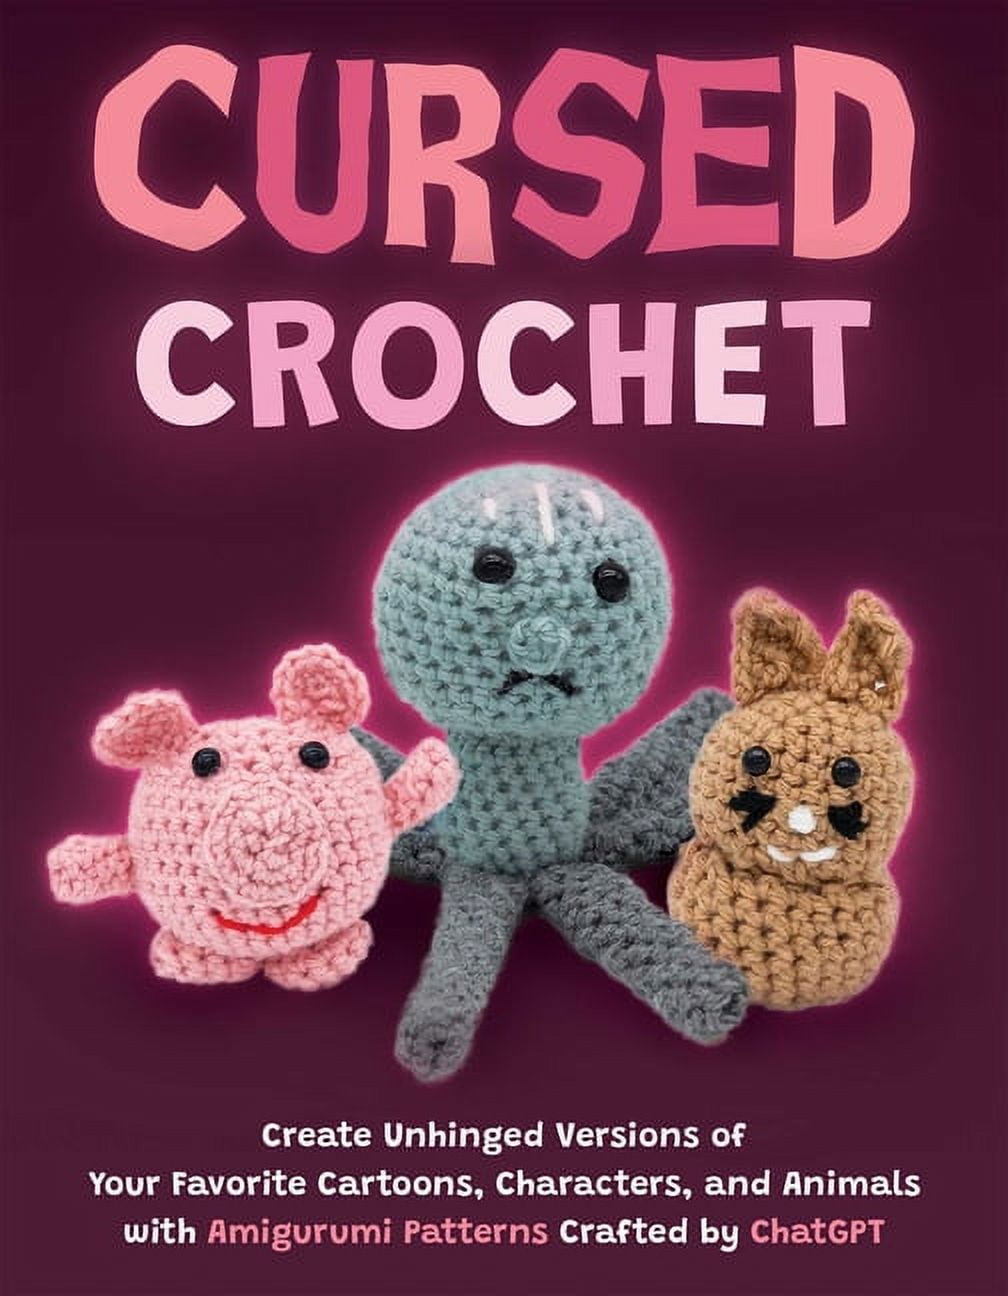 What happens when ChatGPT tries to create crochet patterns